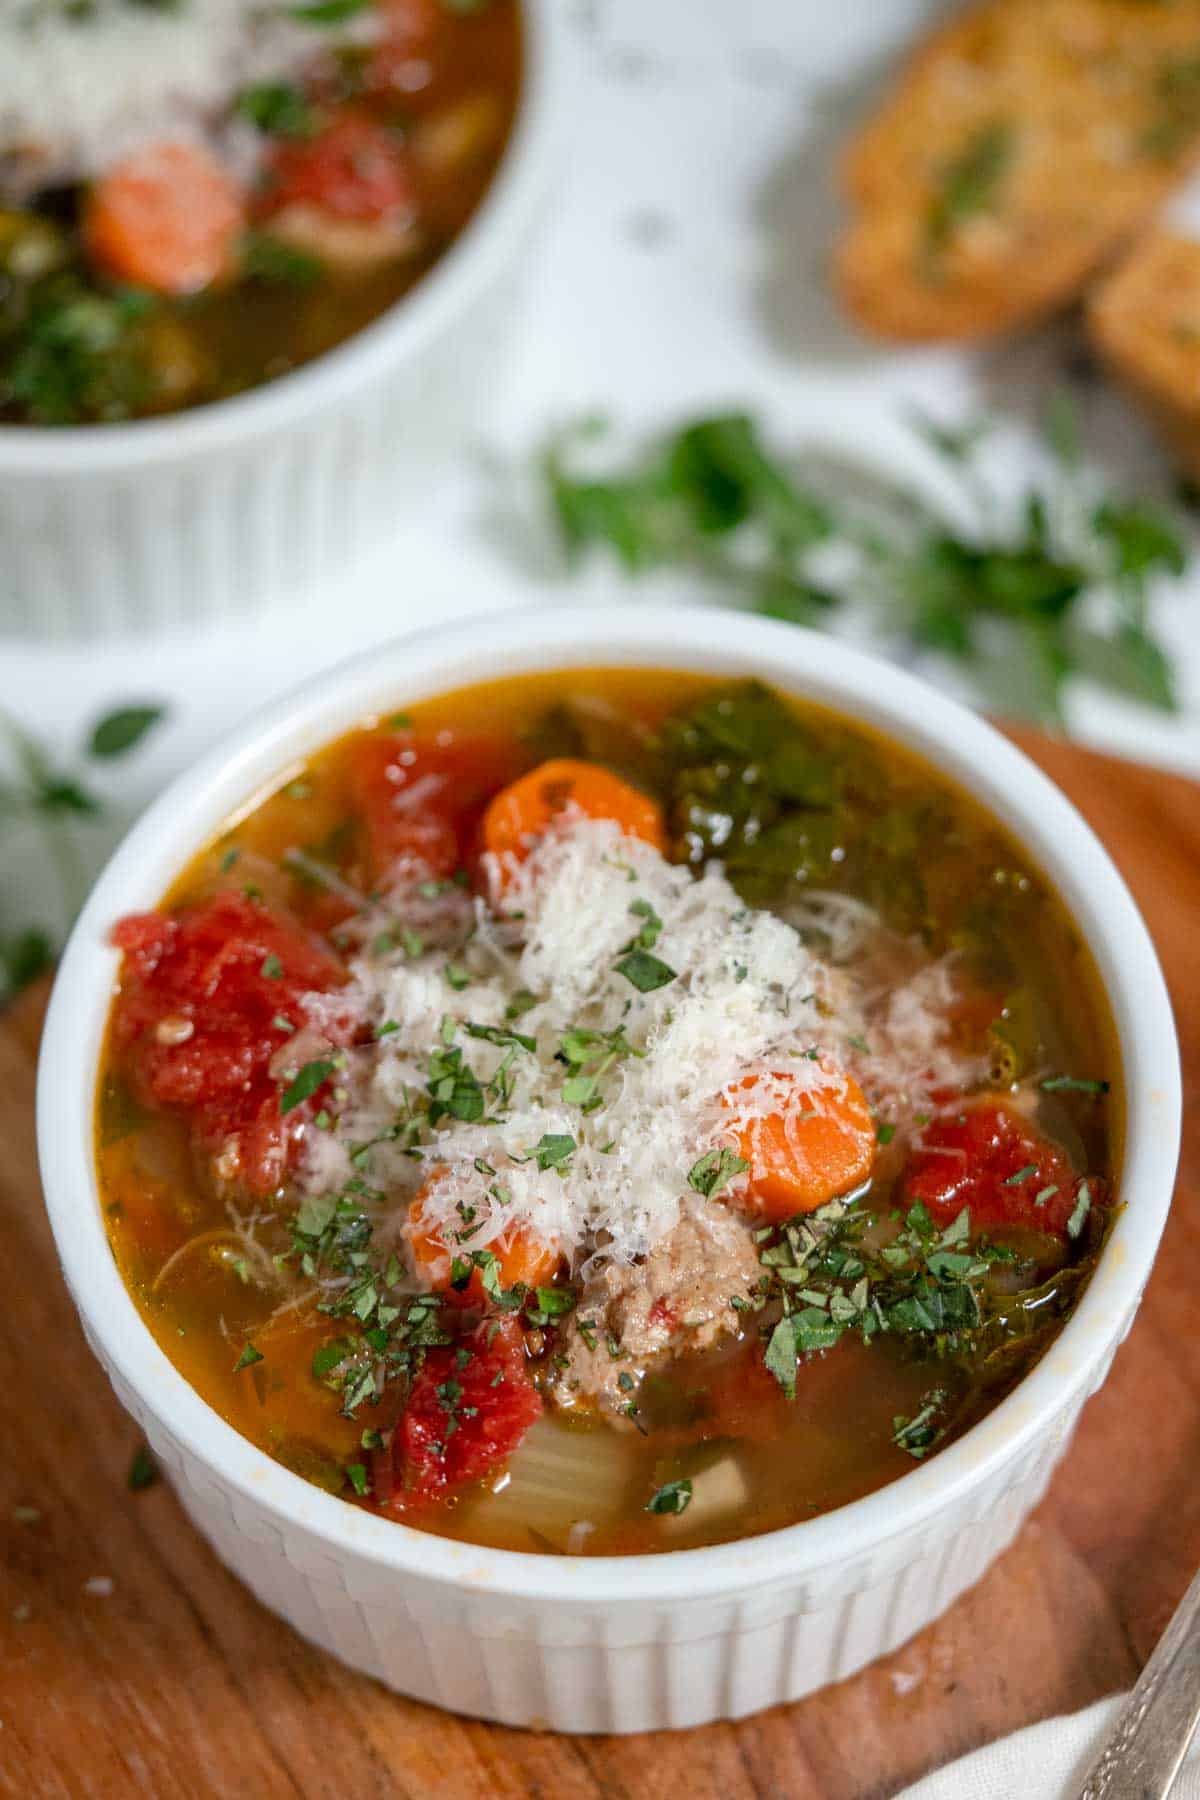 Bowl of soup with vegetables and ground turkey in broth with cheese and fresh herbs on top.